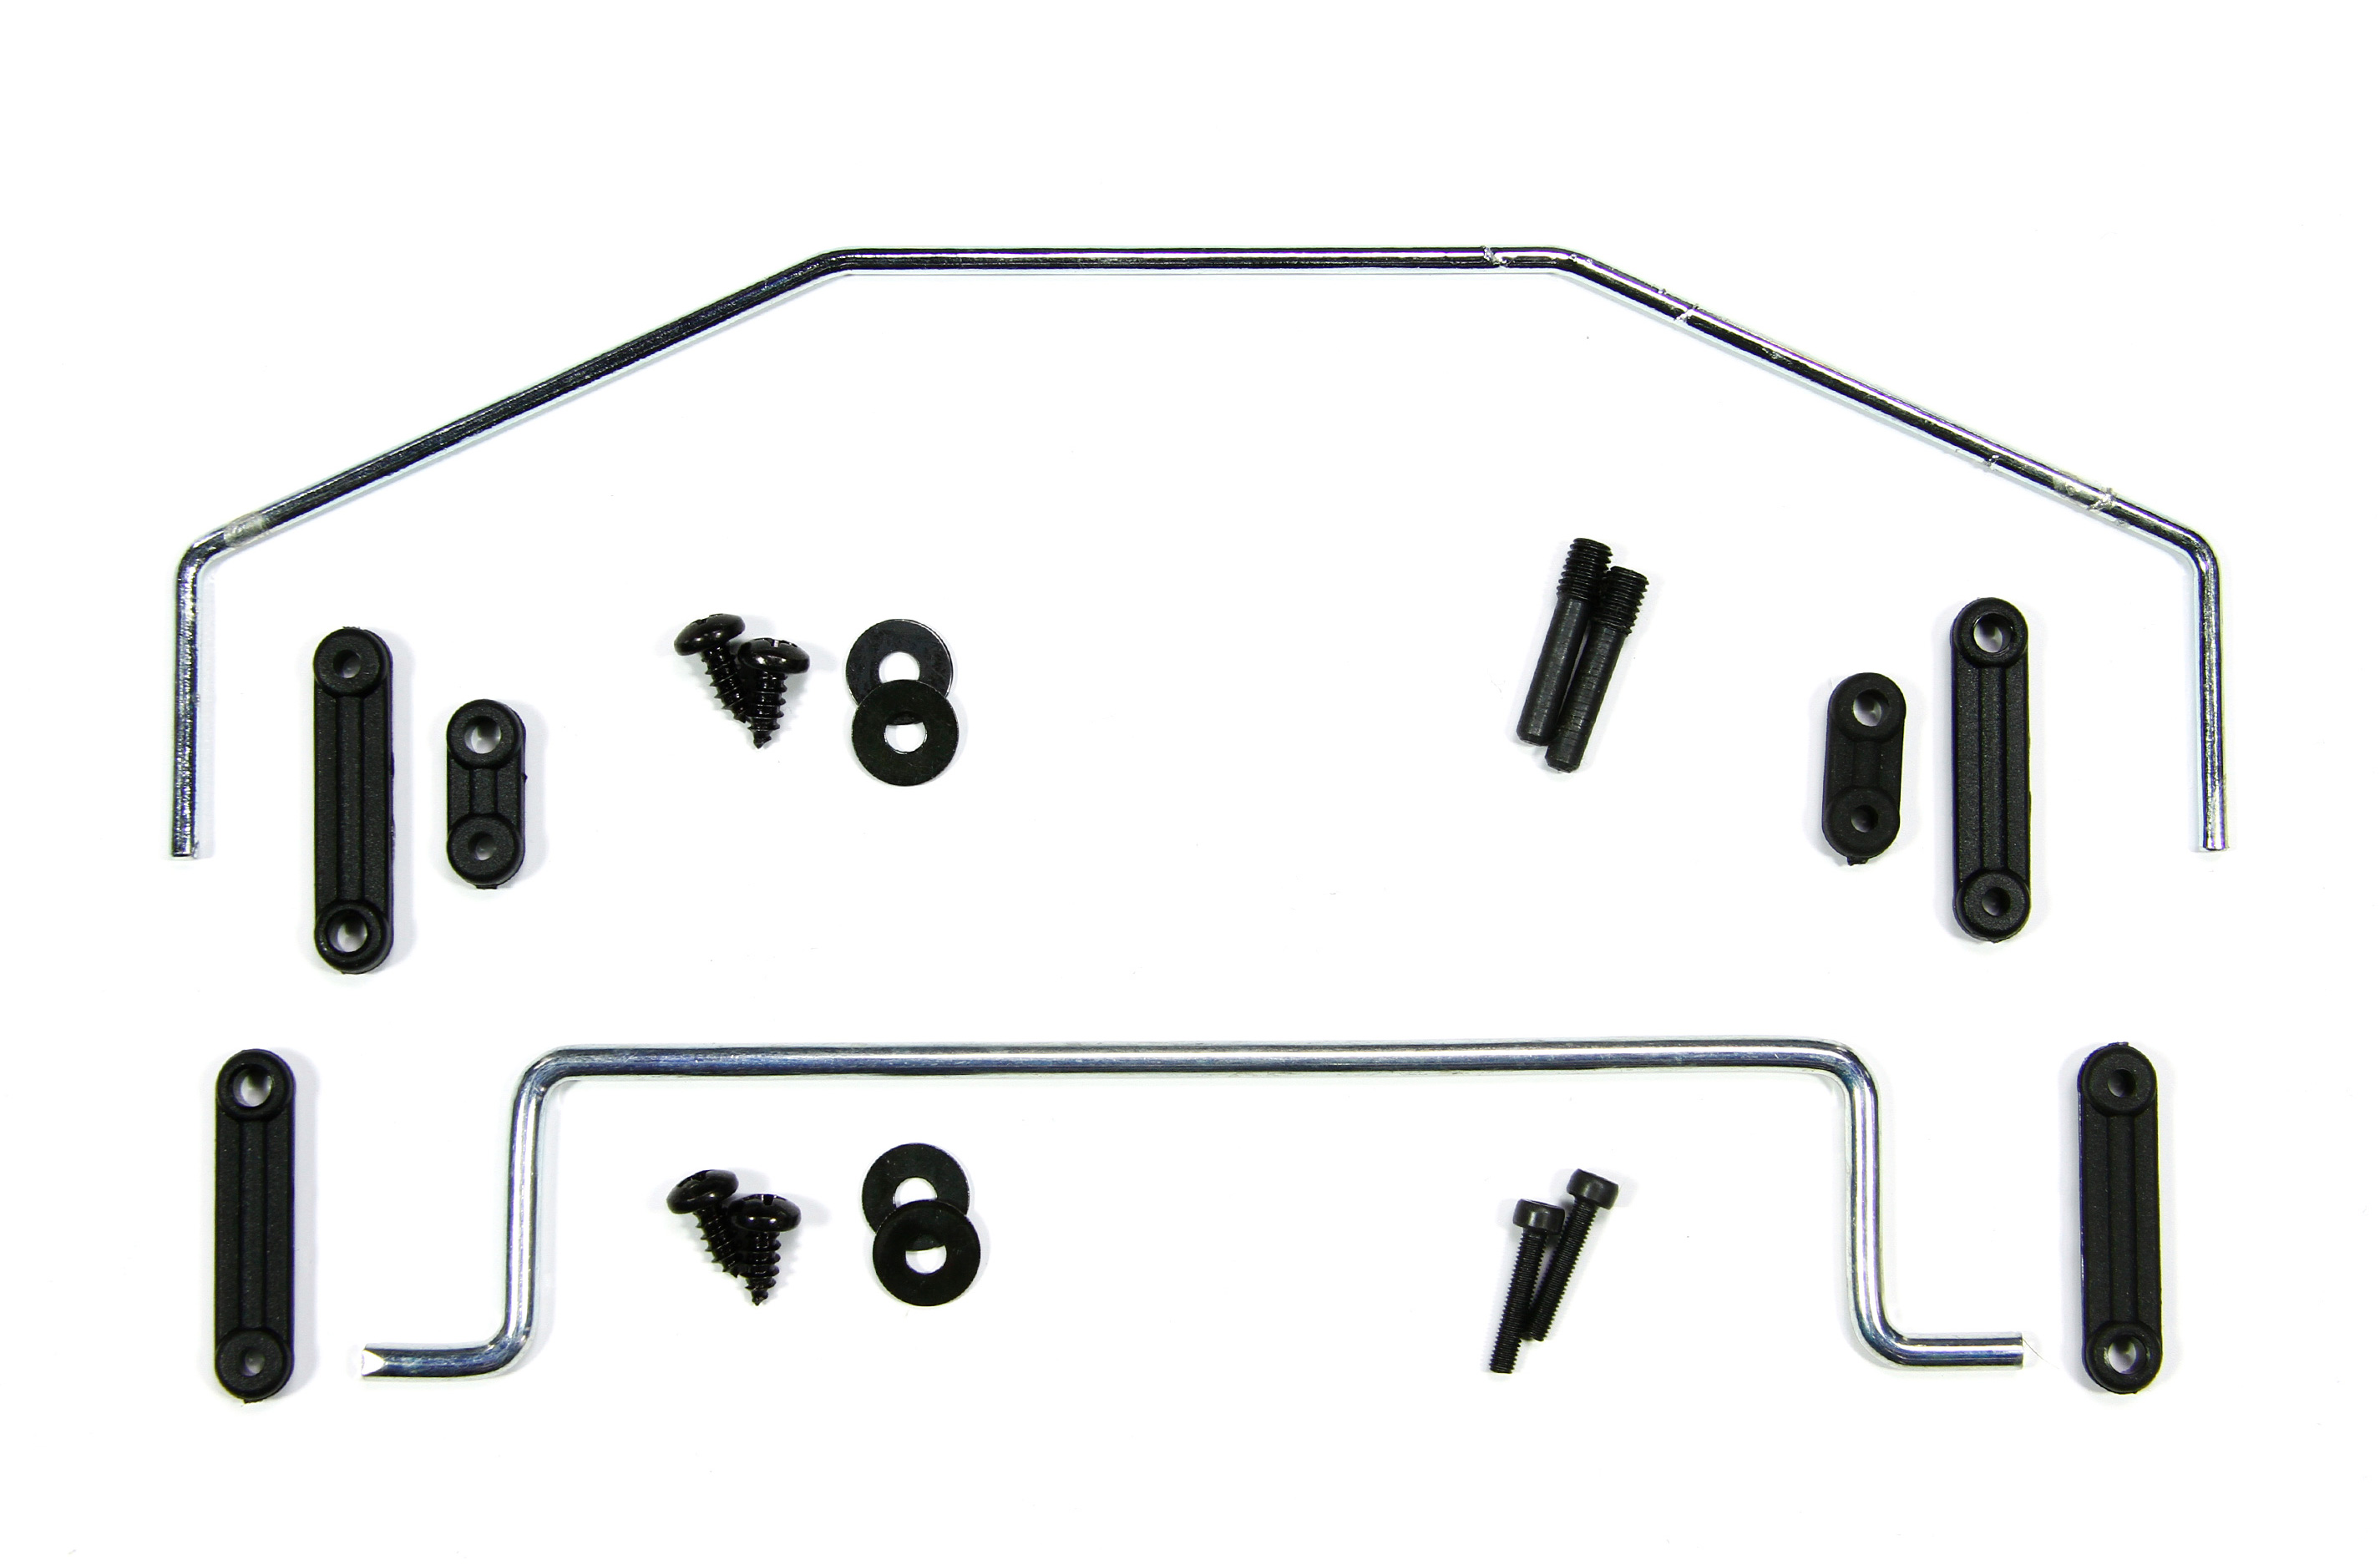 6425/01 FG Stabilizer front/rear for 1/6 scale models